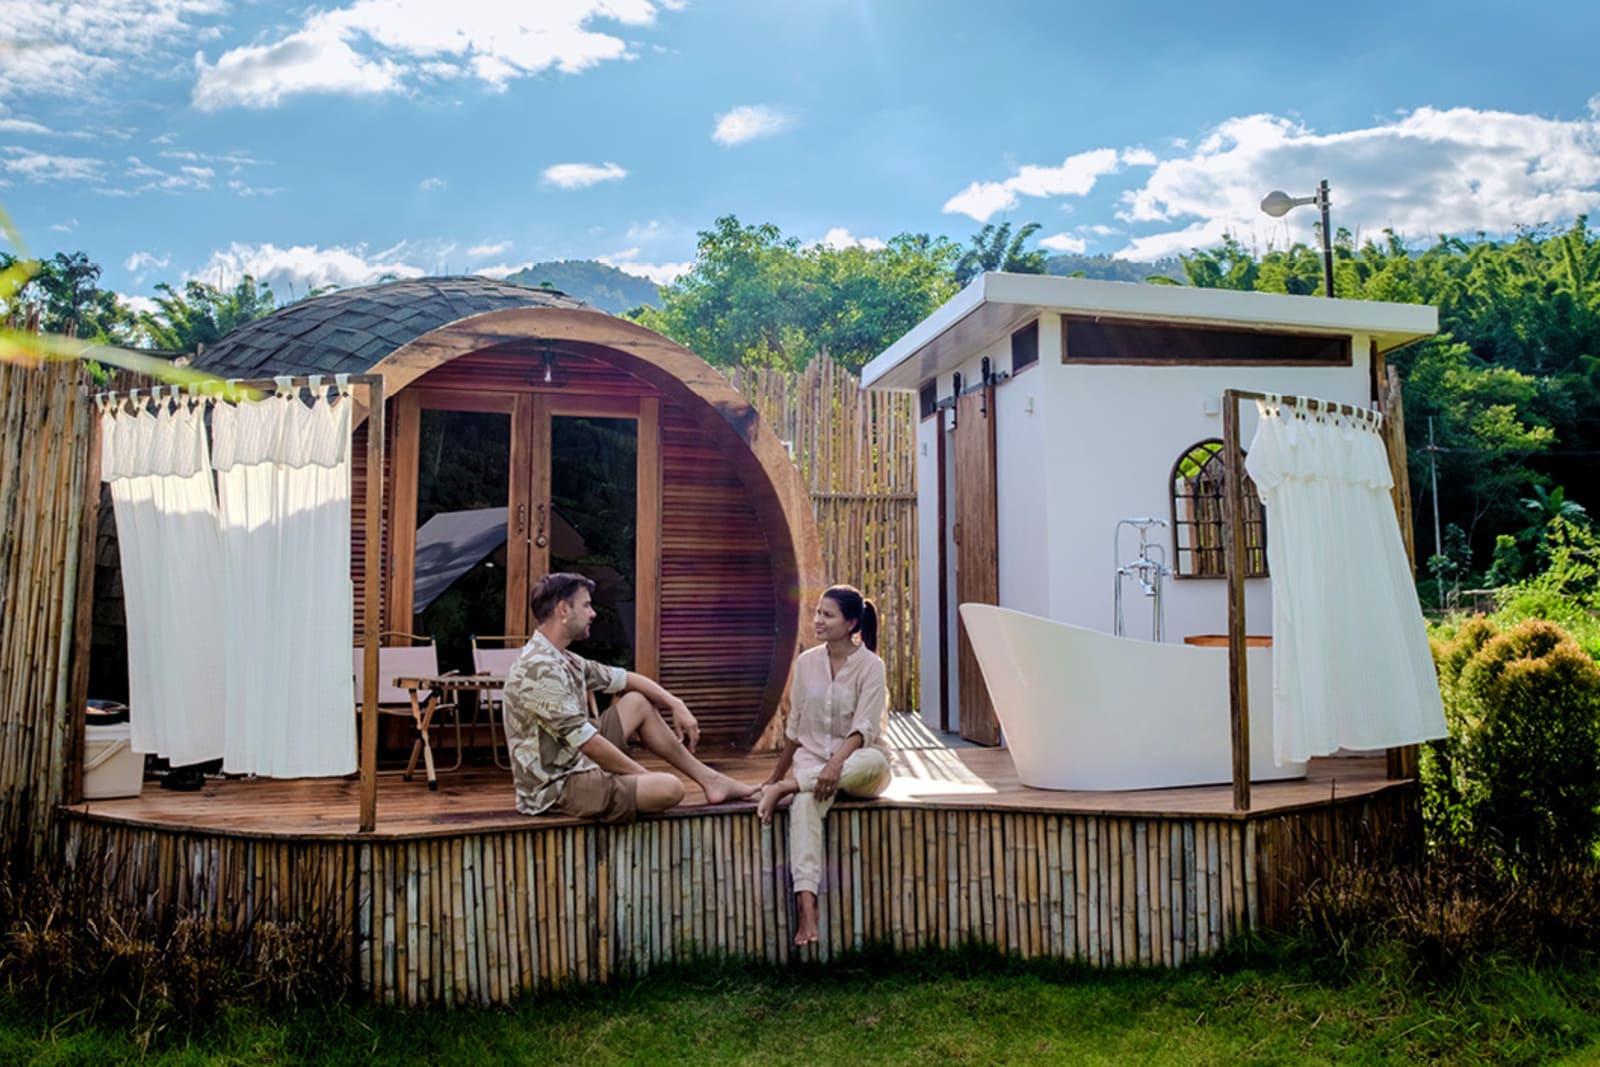 Travellers relaxing at an eco-lodge